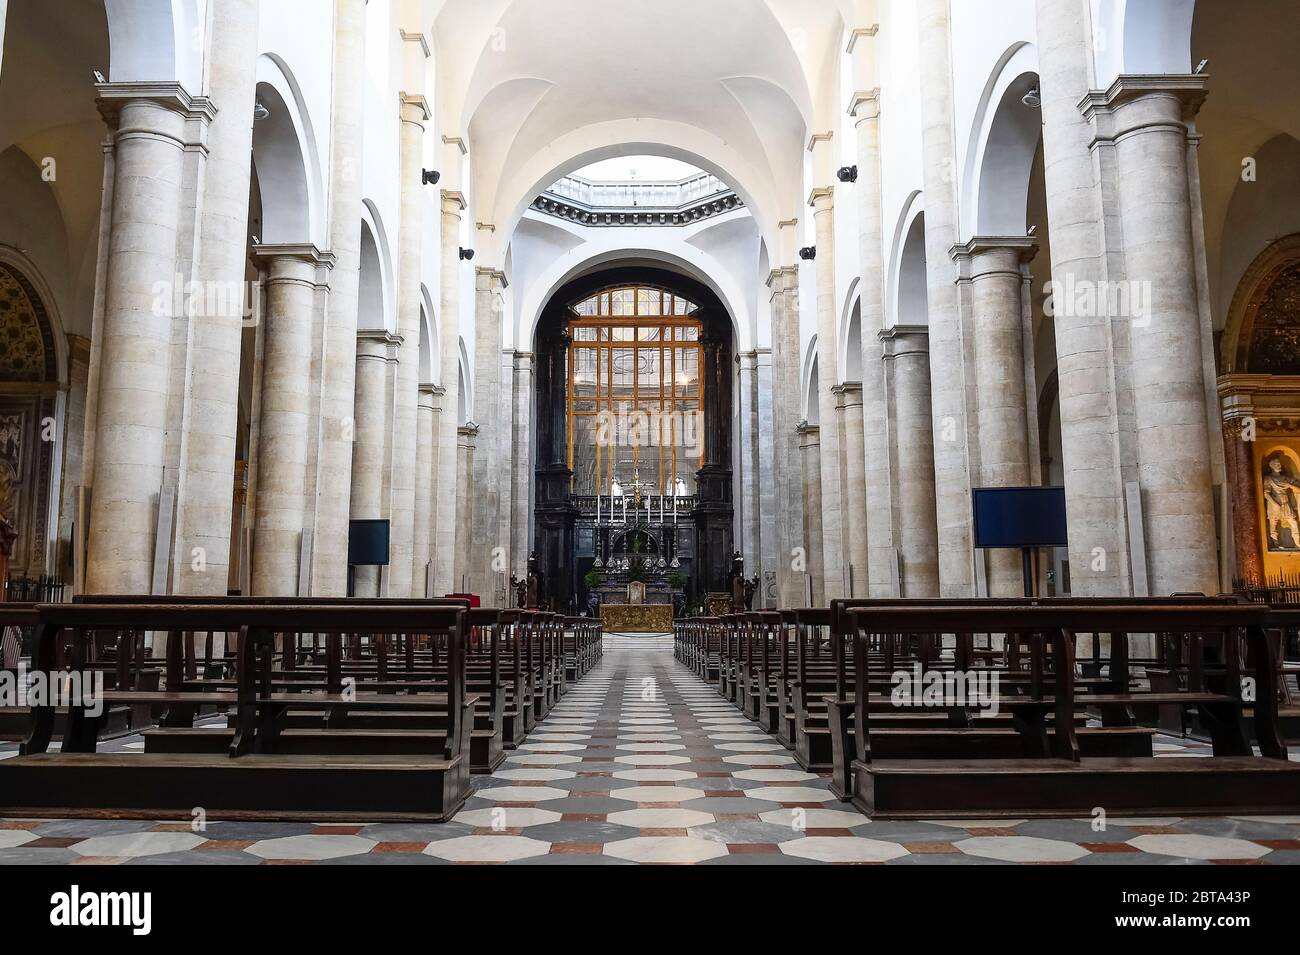 Turin, Italy - 10 March, 2020: A general view of the deserted Turin Cathedral. The Italian government puts the whole country on lockdown as Italy is battling the world's second-most deadly COVID-19 coronavirus outbreak after China. Credit: Nicolò Campo/Alamy Live News Stock Photo